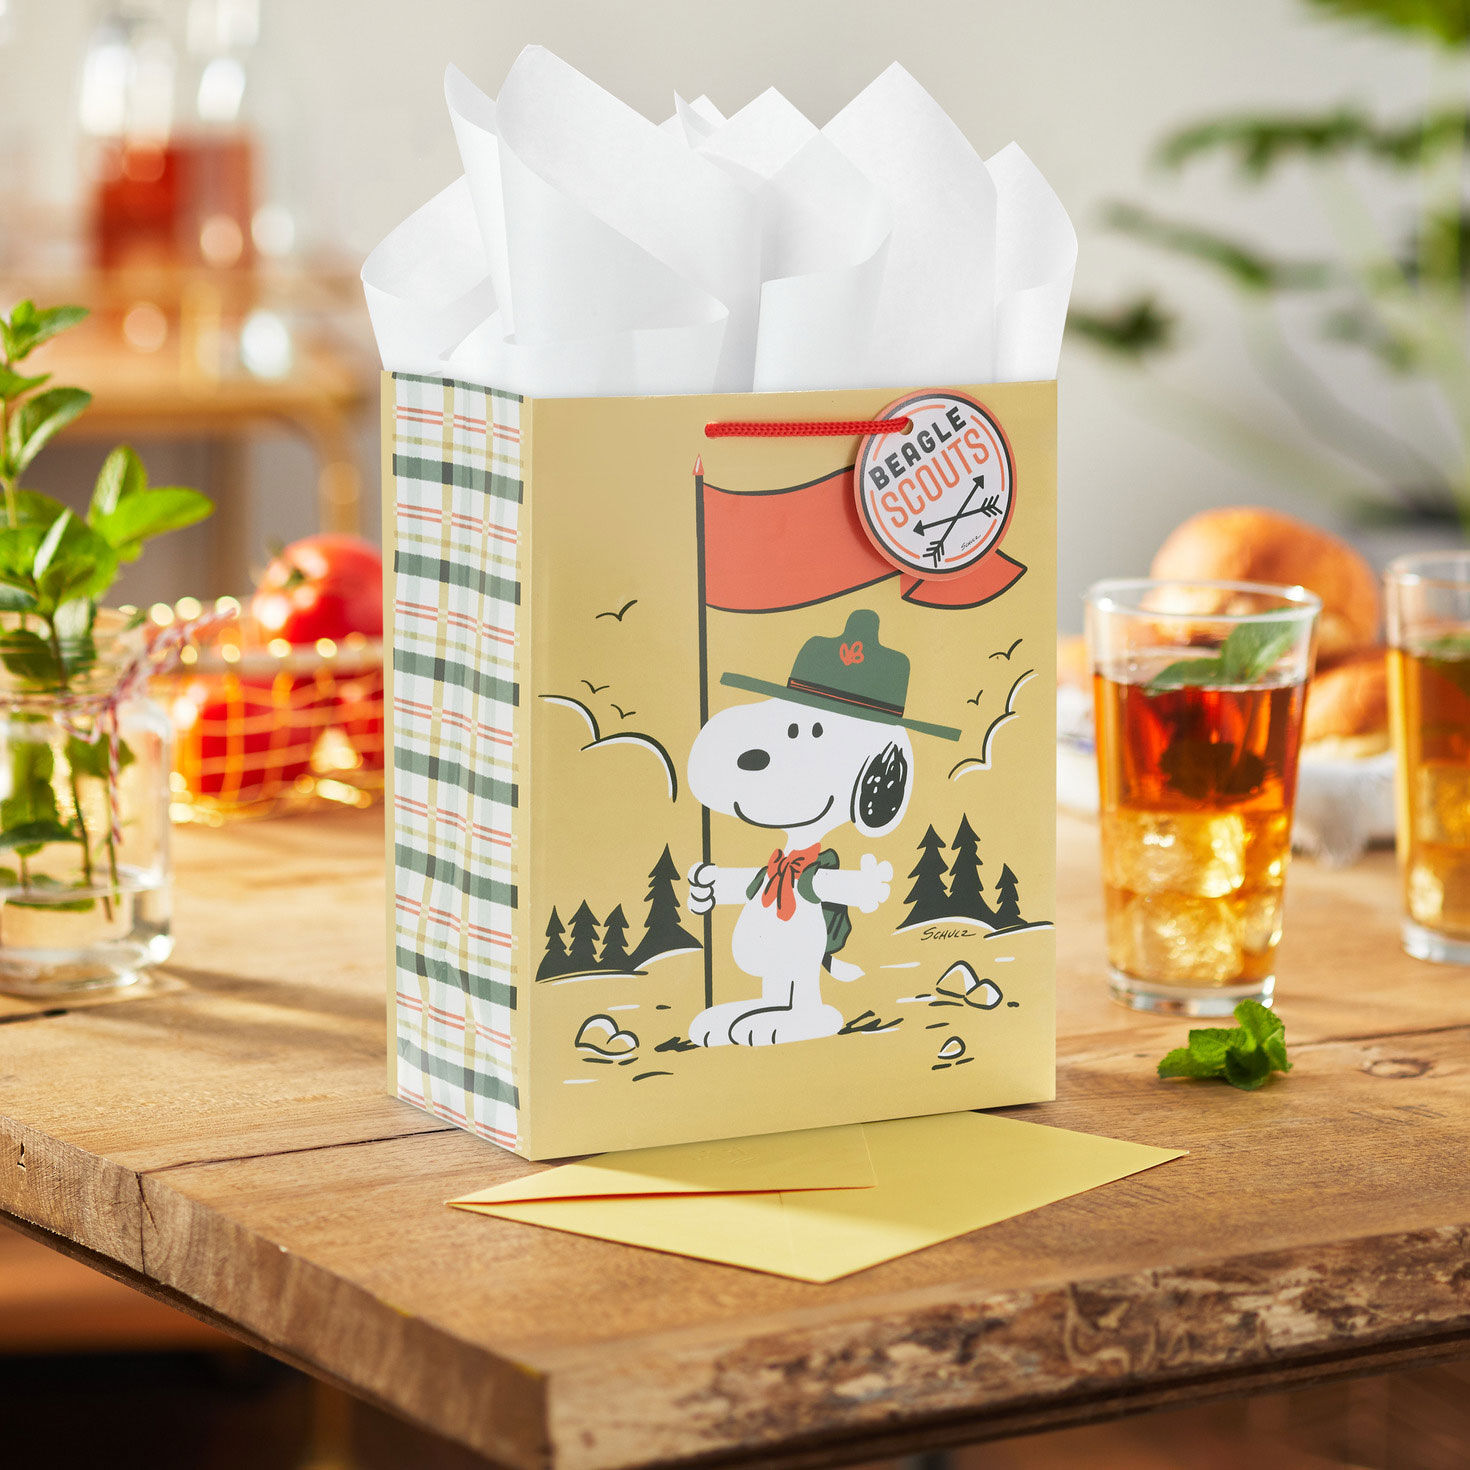 9.6" Peanuts® Beagle Scouts Snoopy Medium Gift Bag for only USD 3.49 | Hallmark